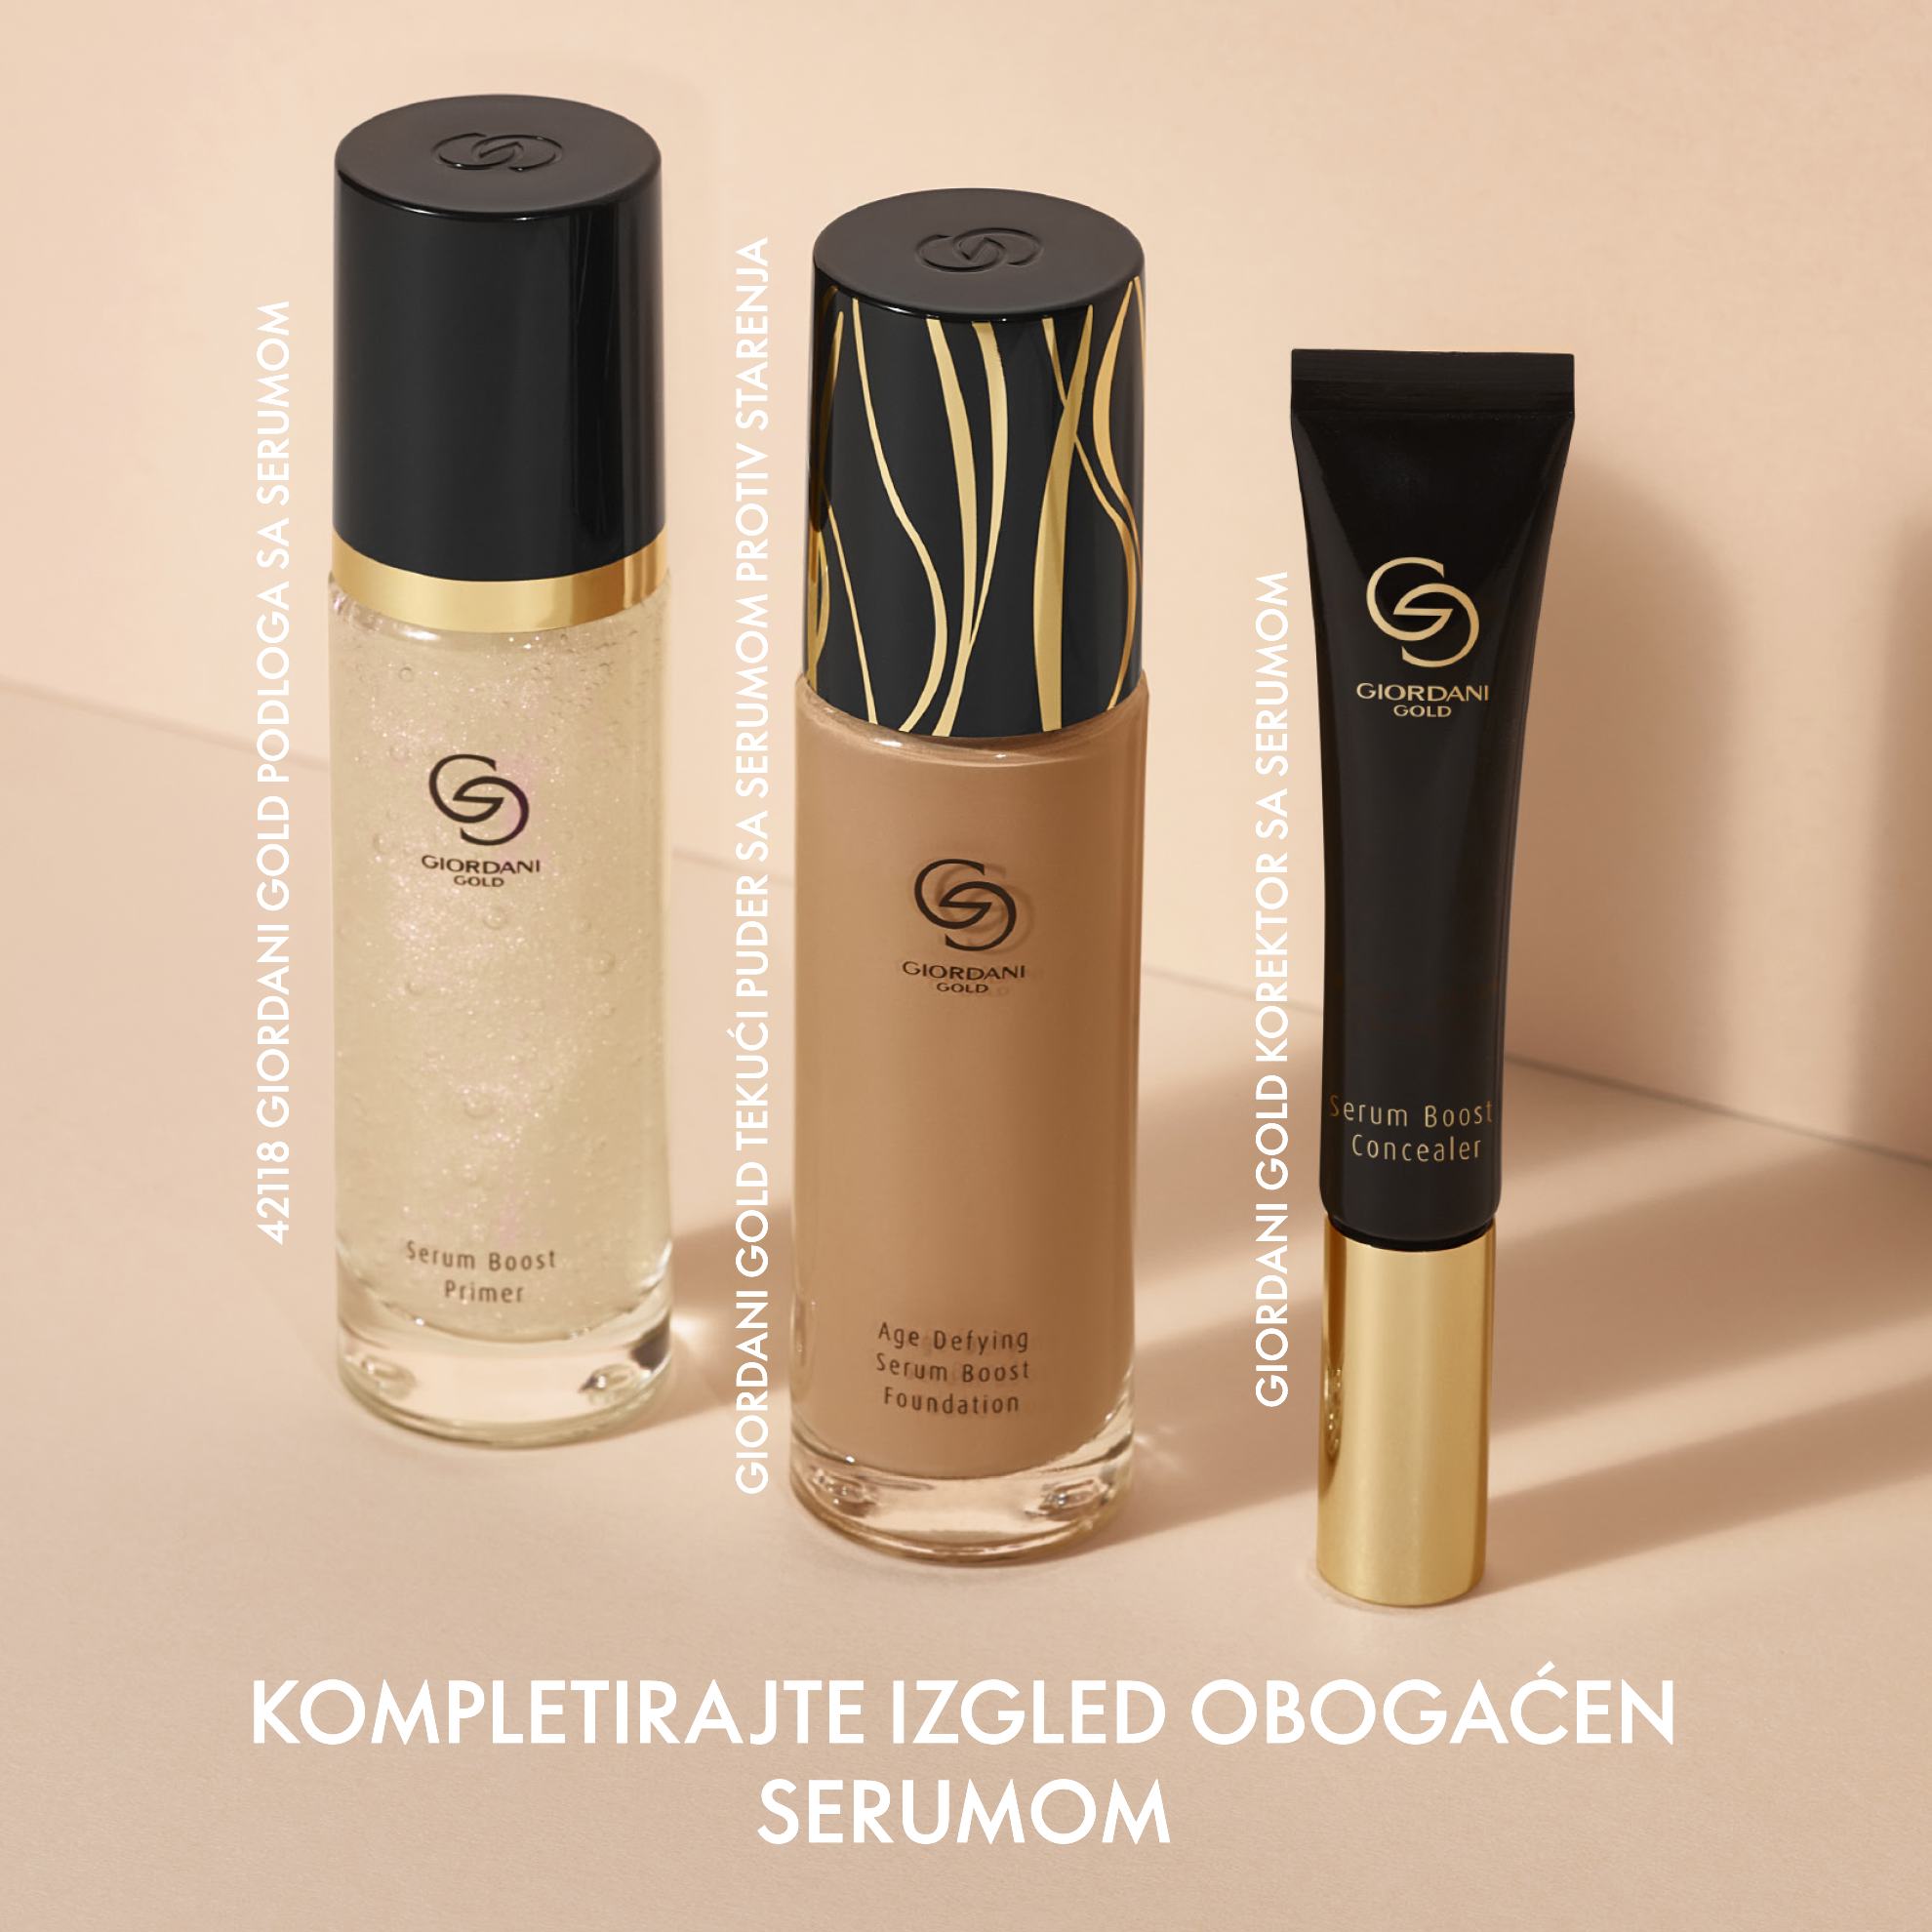 https://media-cdn.oriflame.com/productImage?externalMediaId=product-management-media%2fProducts%2f40952%2fBA%2f40952_7.png&id=16909586&version=1